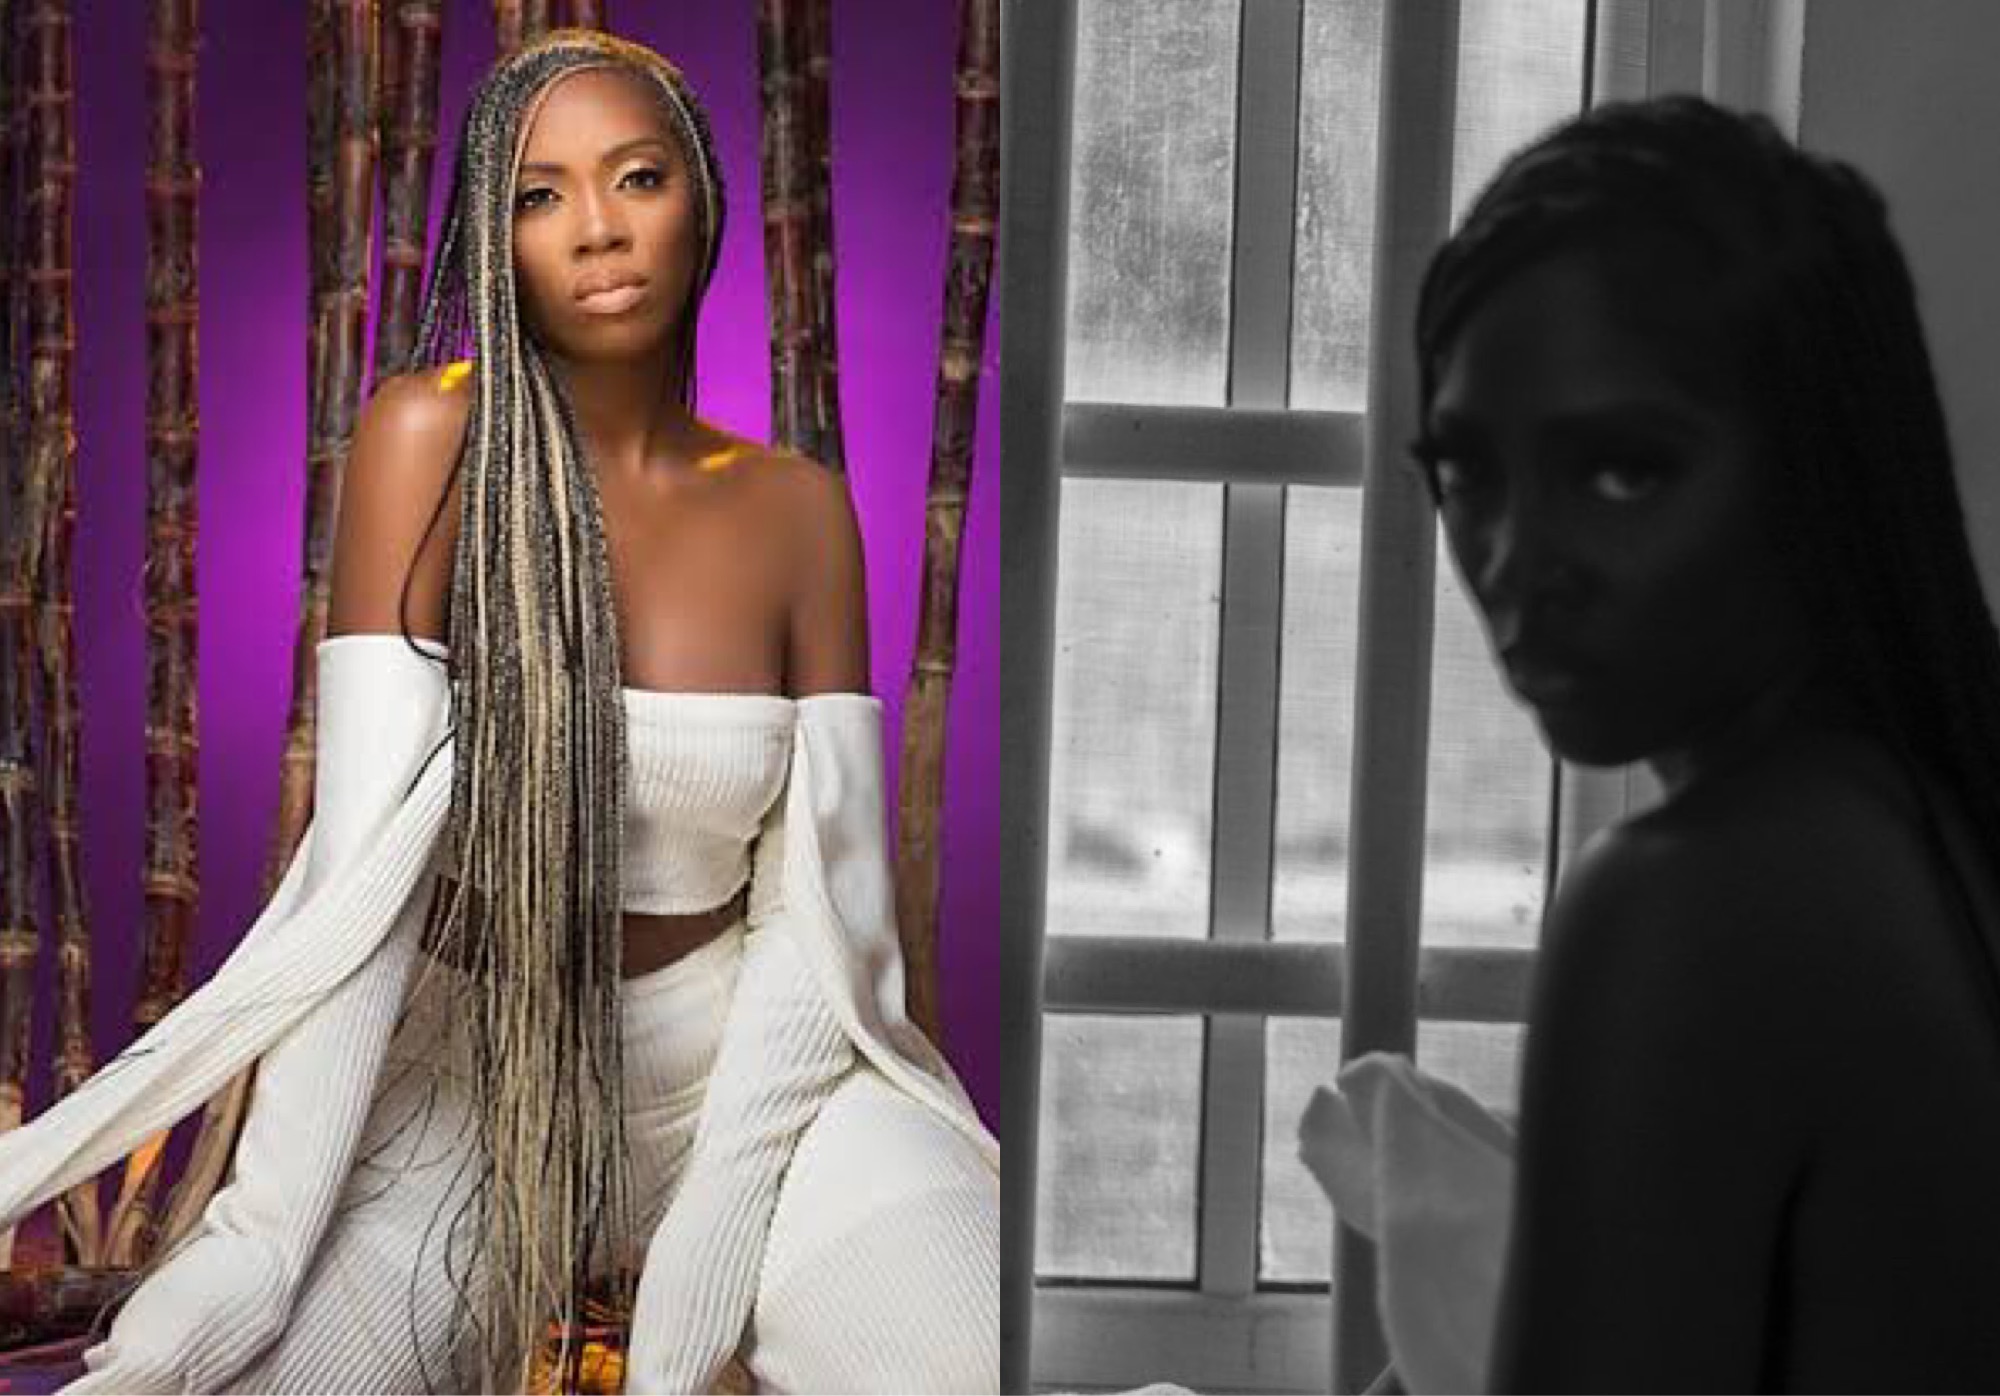 Tiwa Savage Leaves Fans Stunned As She Shares Raunchy Photos On Instagram